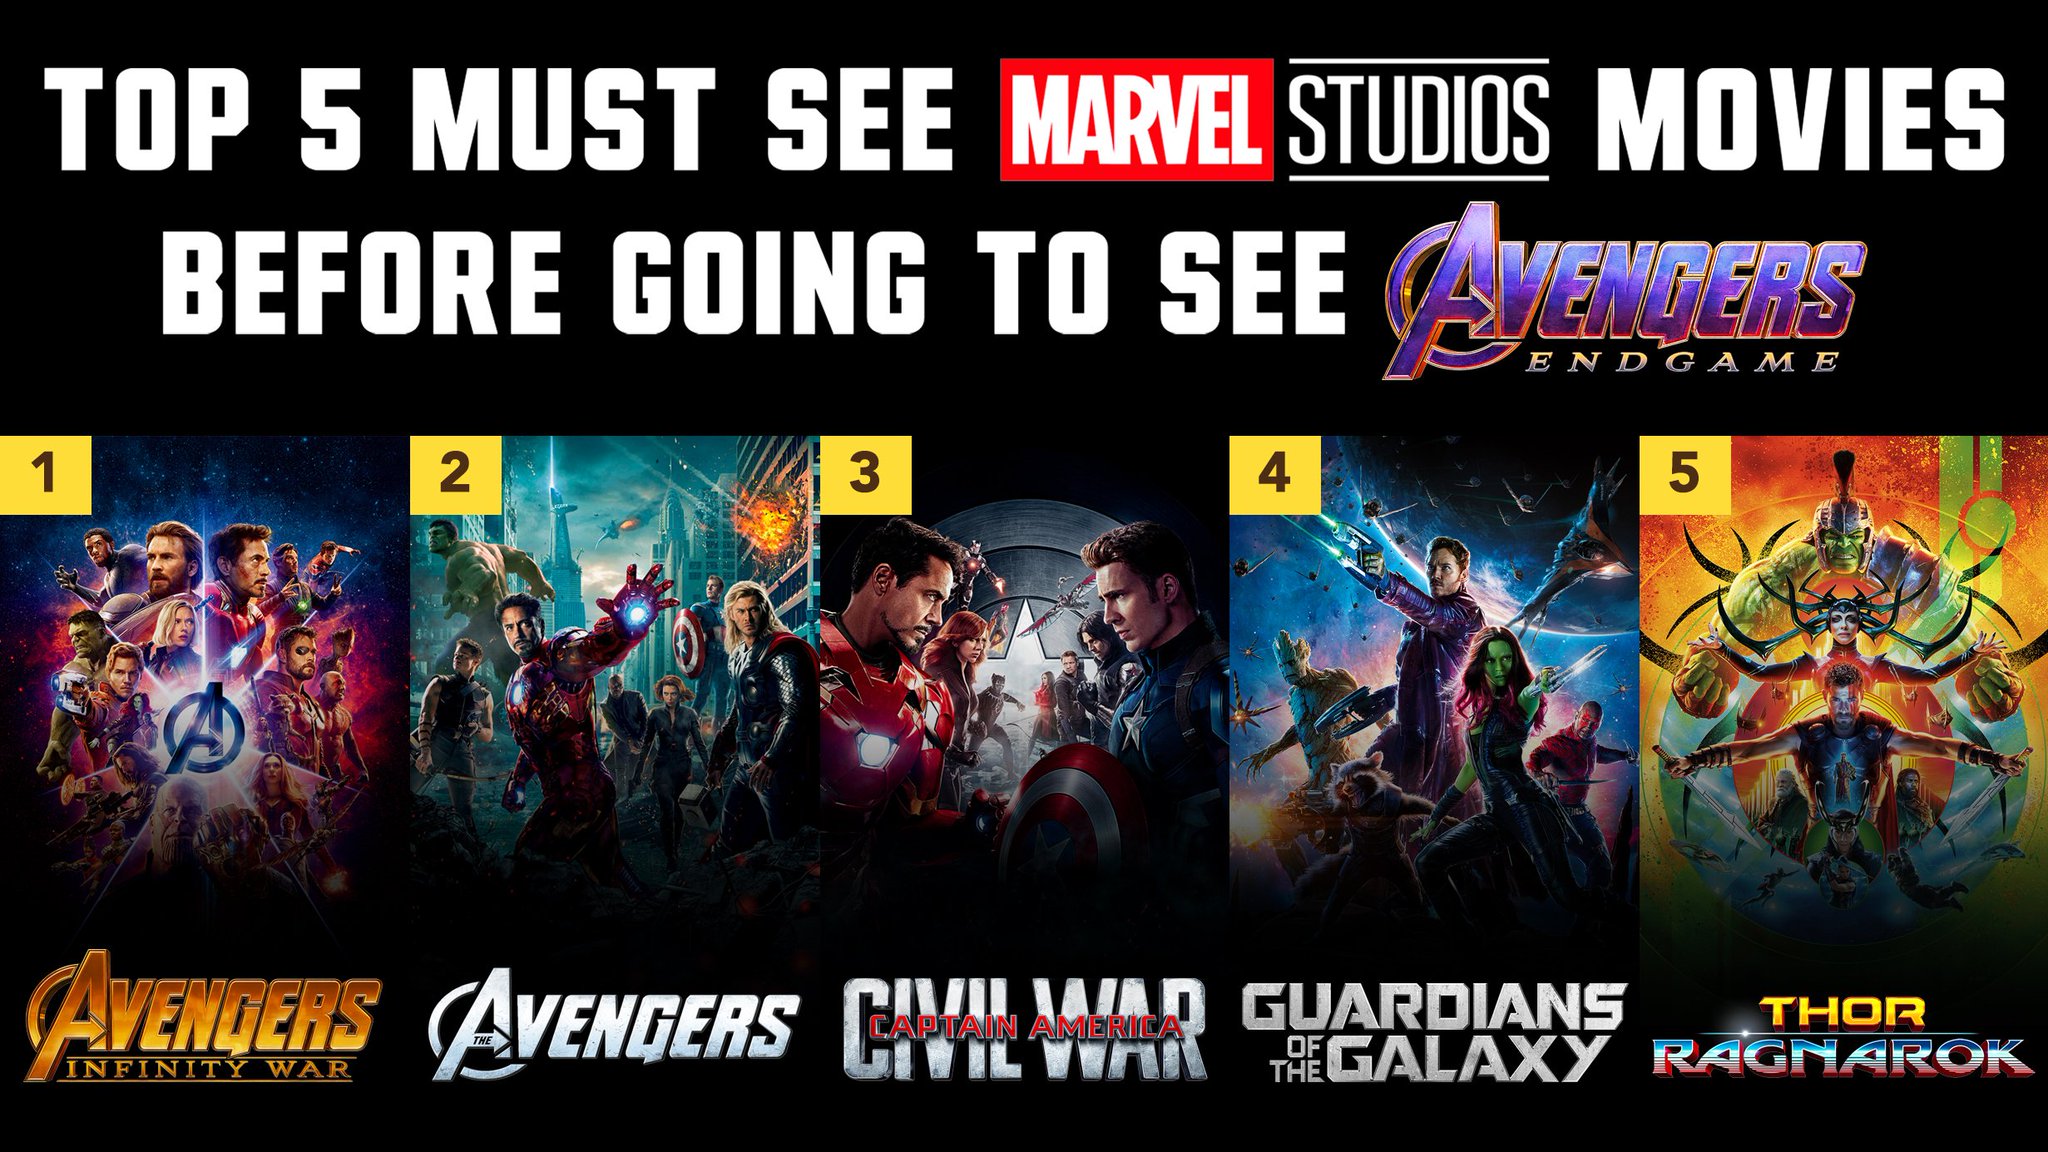 Everything You Need to Know Before Seeing Marvel Studios' Avengers